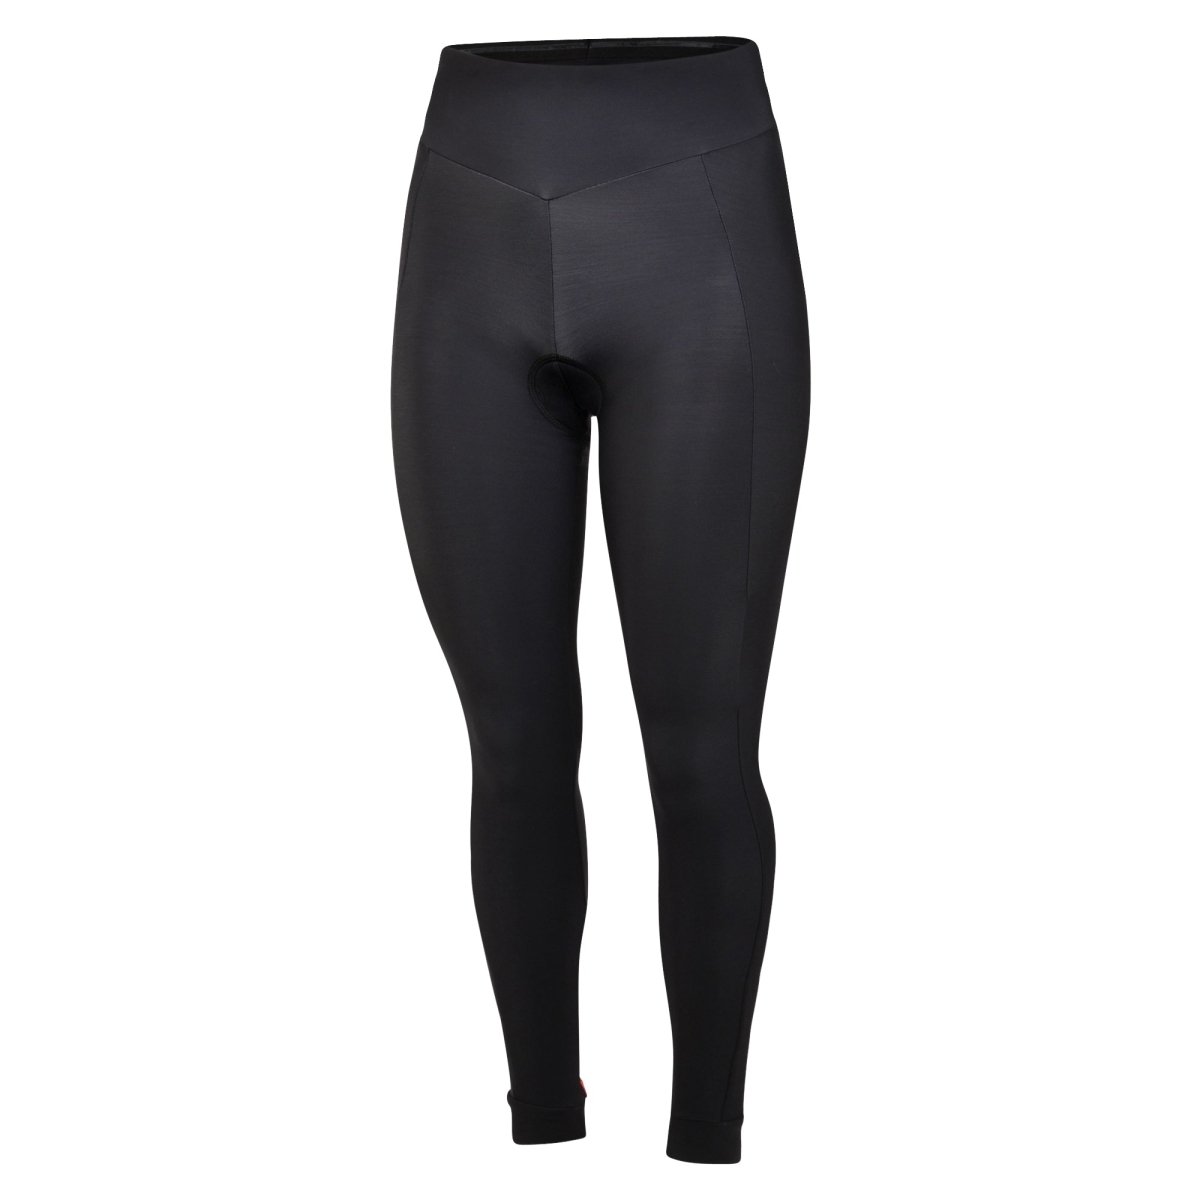 Winter Thermal Ladies Women Cycling Padded Tights Trousers Legging